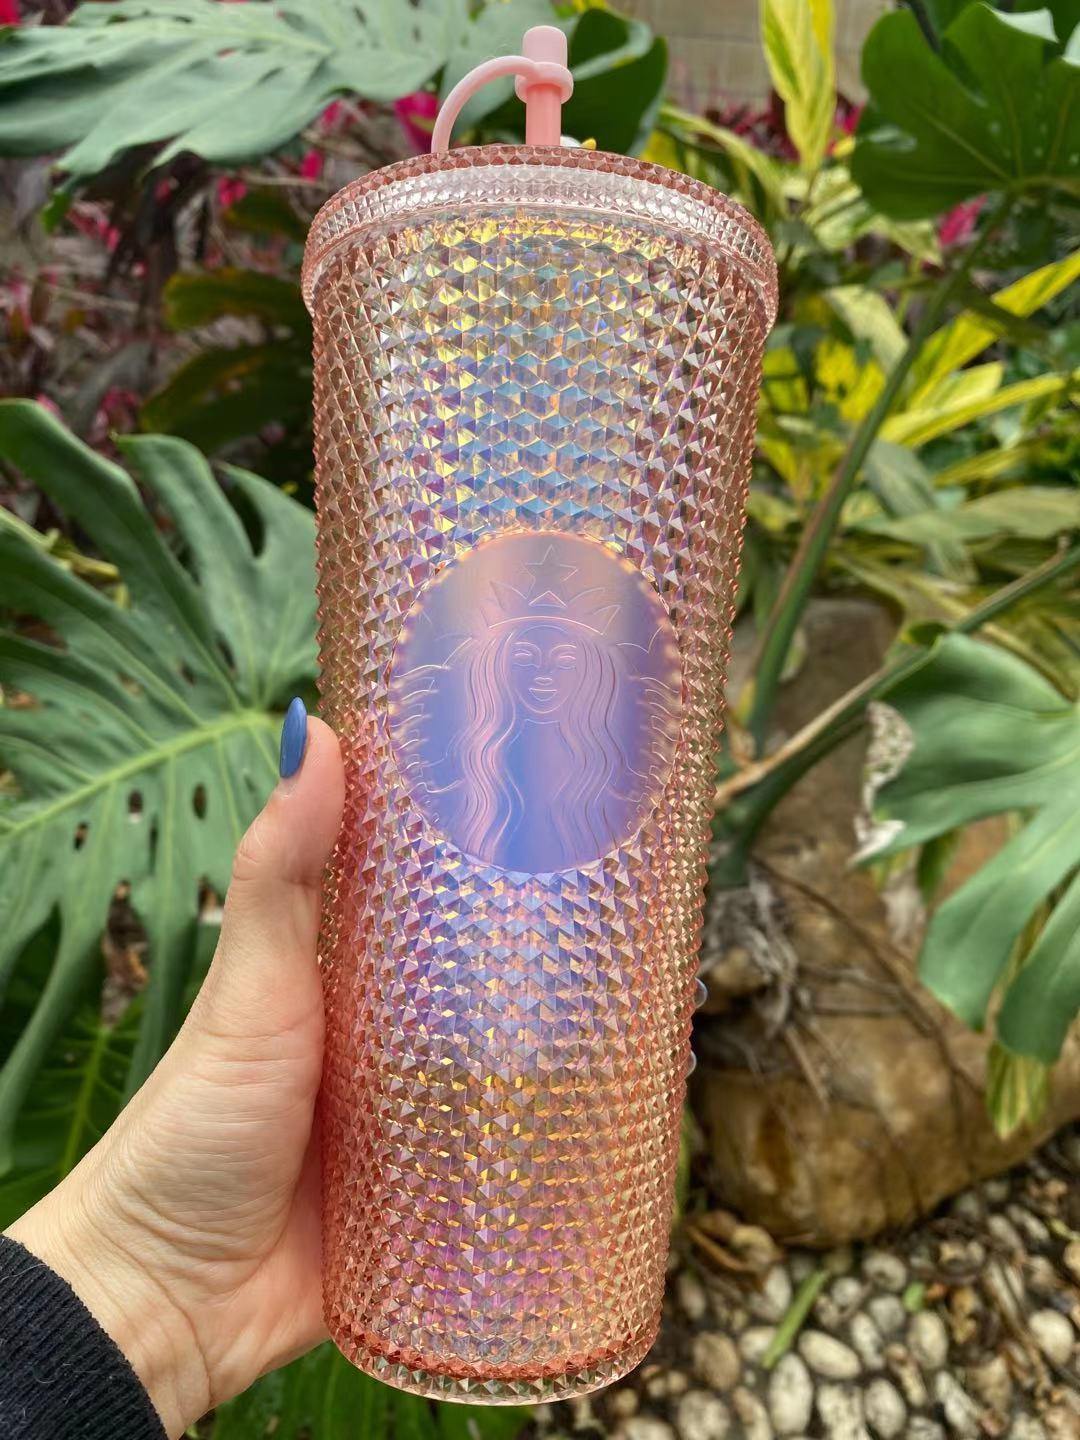 Starbucks 2021 Pale Rose Gold & Year of the Ox Studded Tumbler Set NEW! -  READ